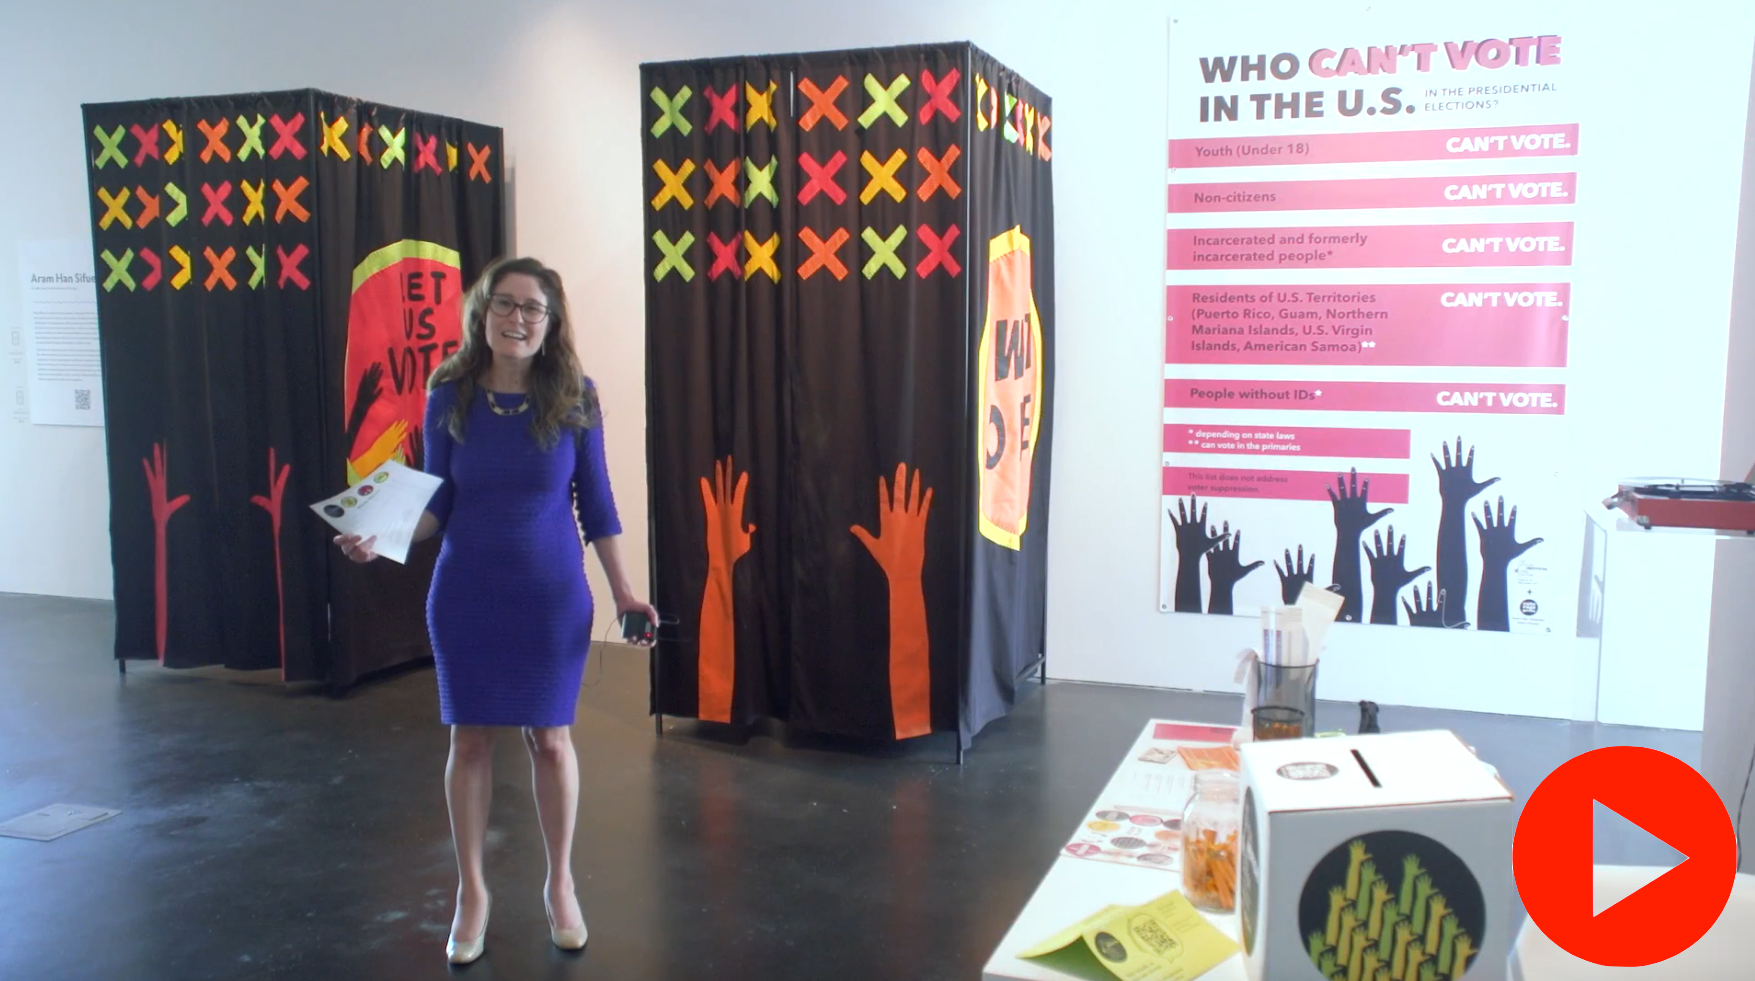 MCA Denver Ellen Bruss Curator, Miranda Lash, stands in Aram Han Sifuentes' installation. Behind her are two voting booths made of black fabric. X’s in red, yellow, and orange cover the fabric. Two hands rise up on the fabric on each booth. On the side “Let us Vote” is in a large circle. 